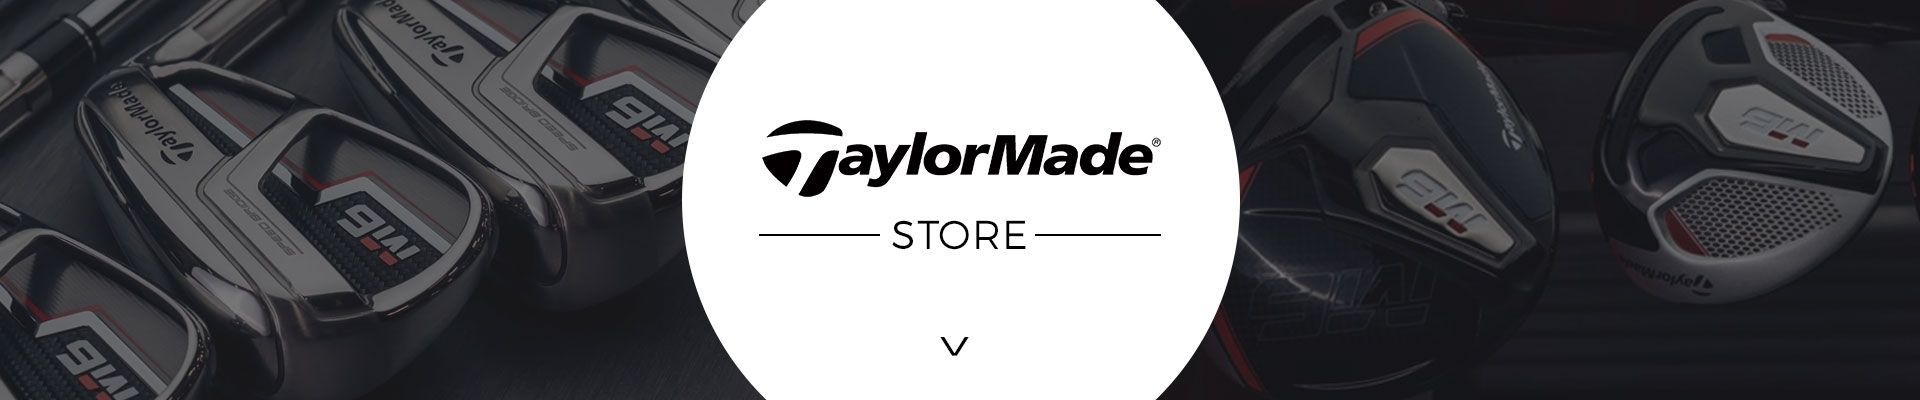 TaylorMade Store